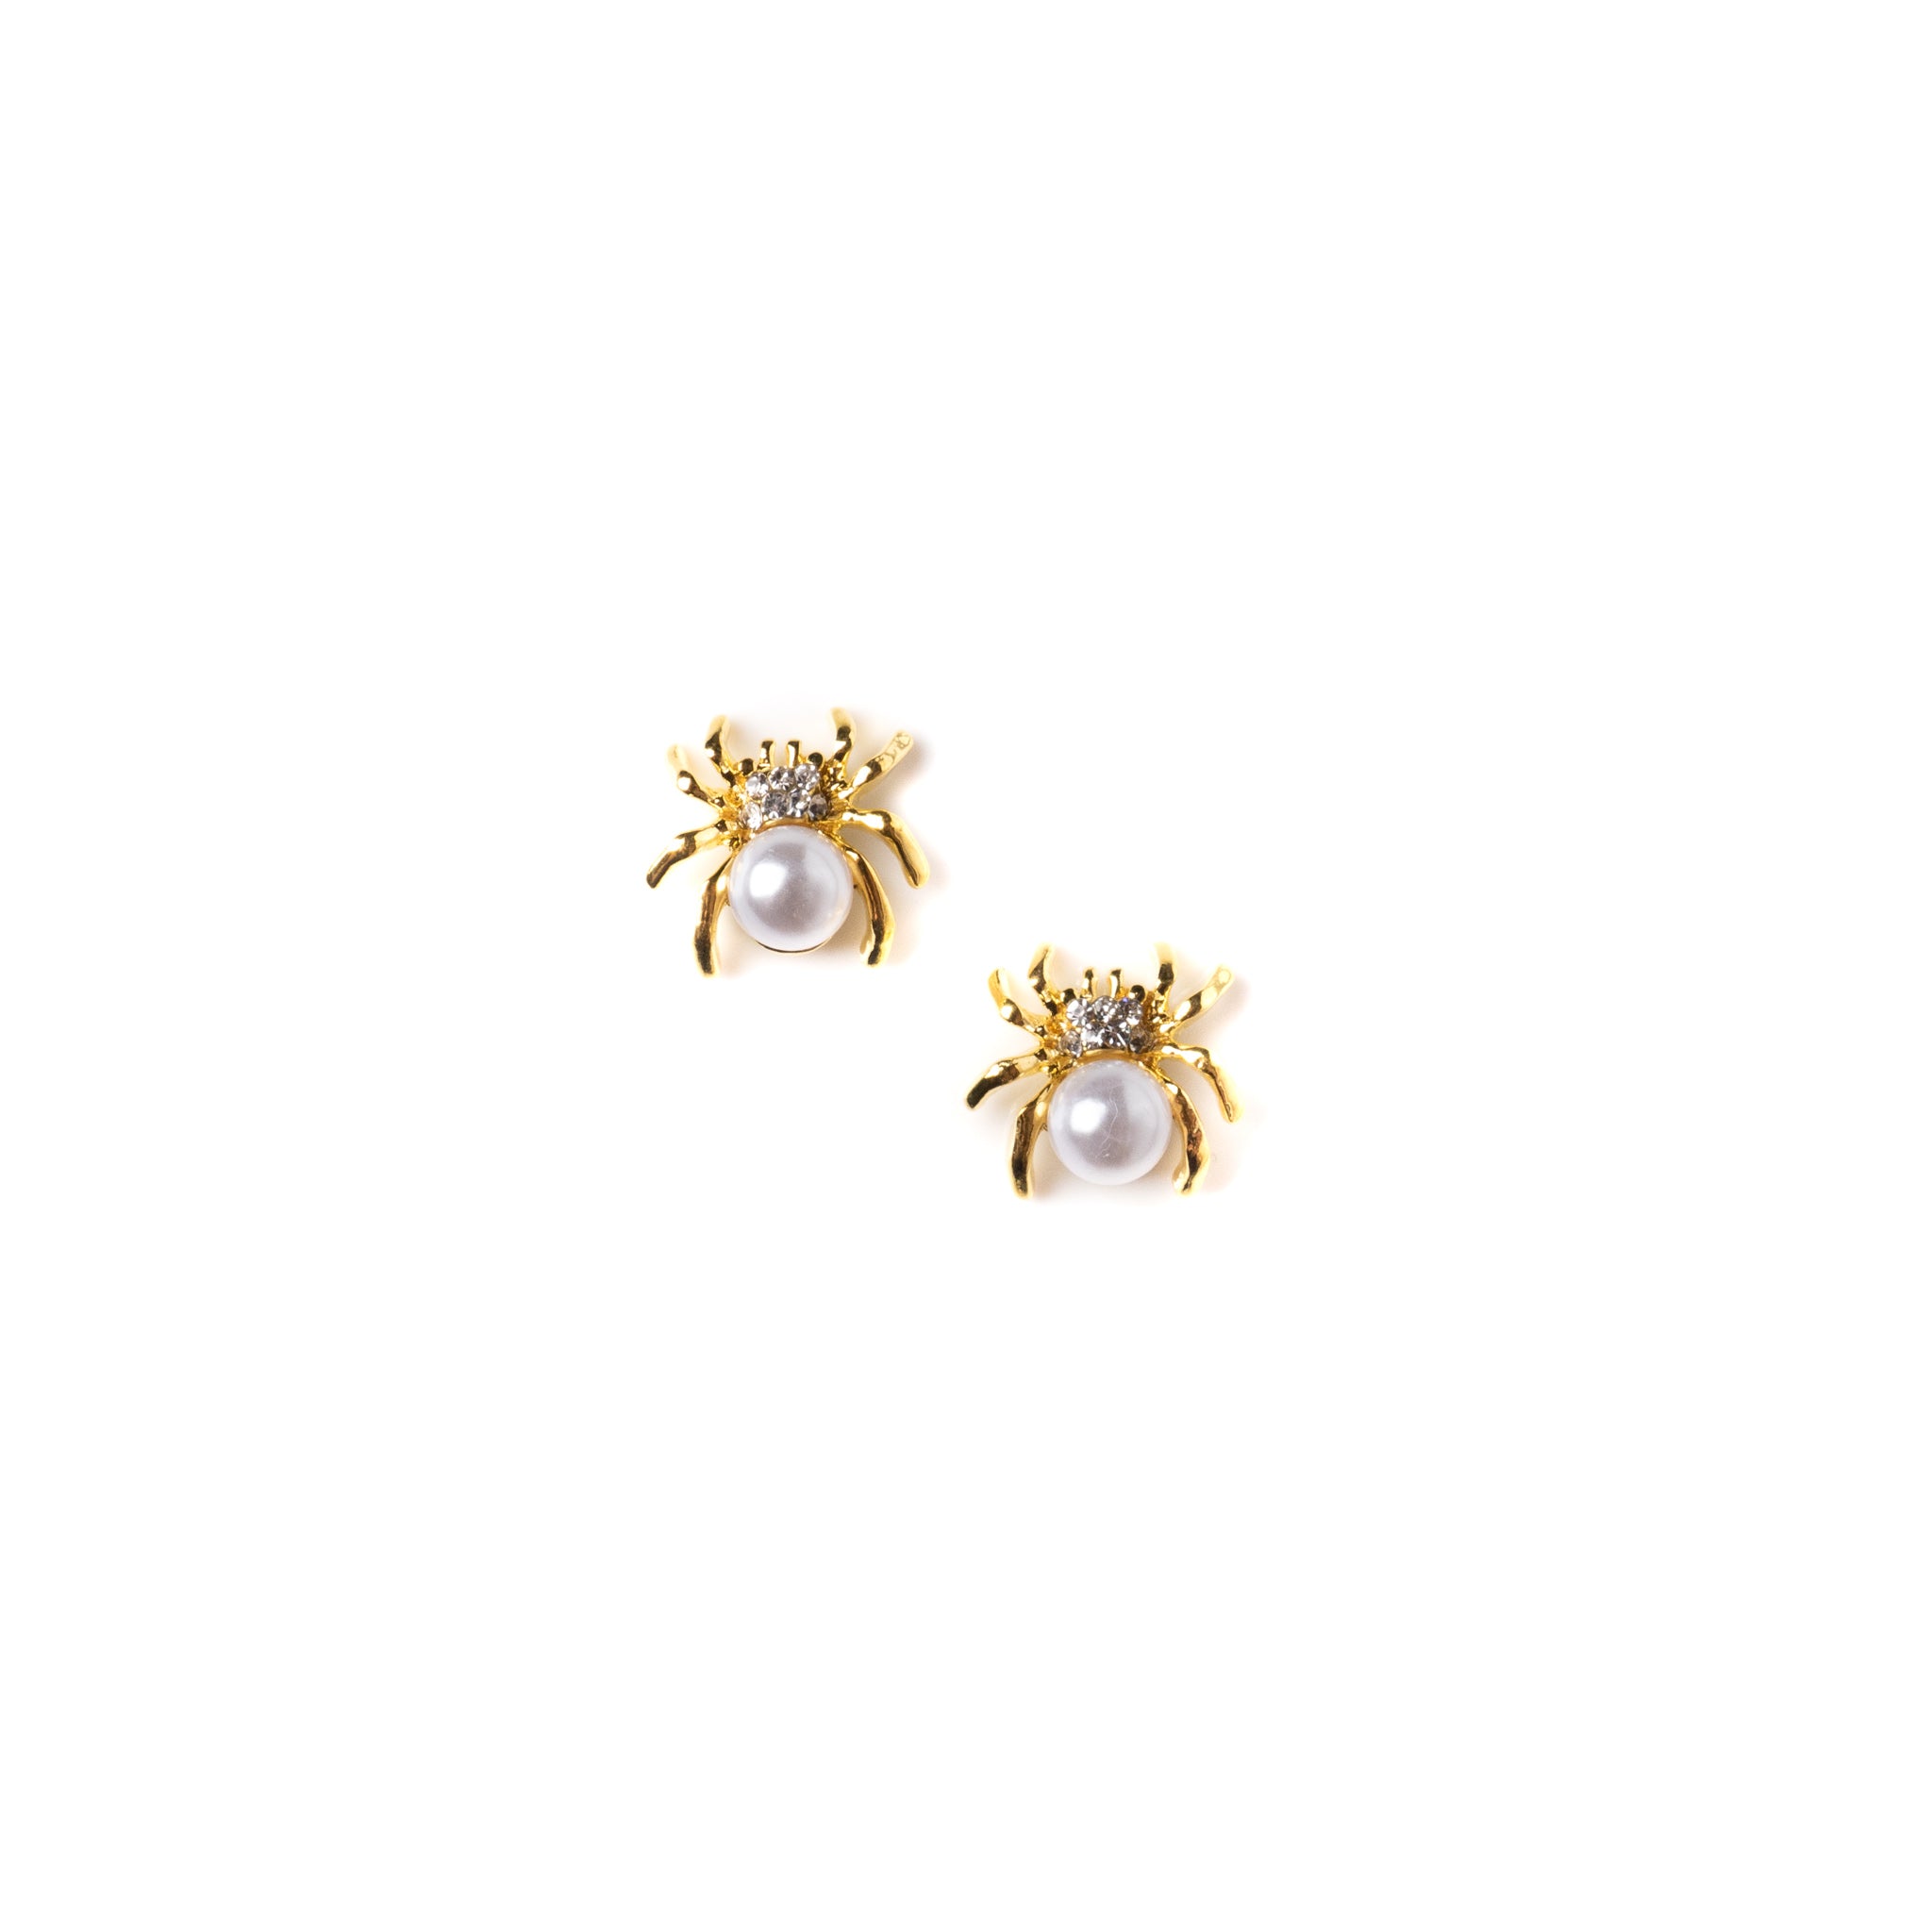 Gold W/ White Pearl Spider Charm